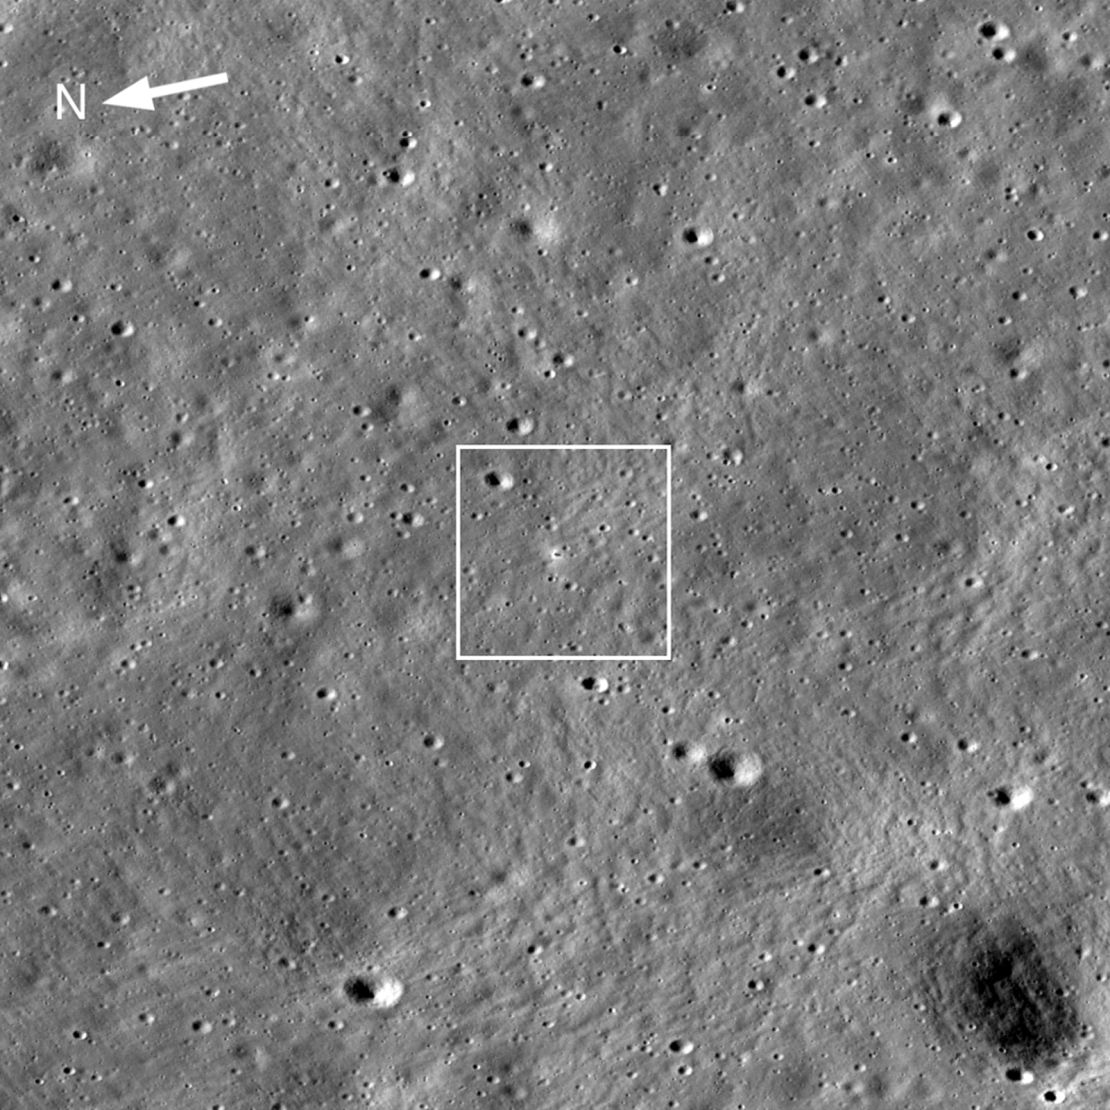 Chandrayaan-3 lander is in the center of the image, its dark shadow is visible against the bright halo surrounding the vehicle. The image is 1,738 meters wide; frame No. M1447750764LR.